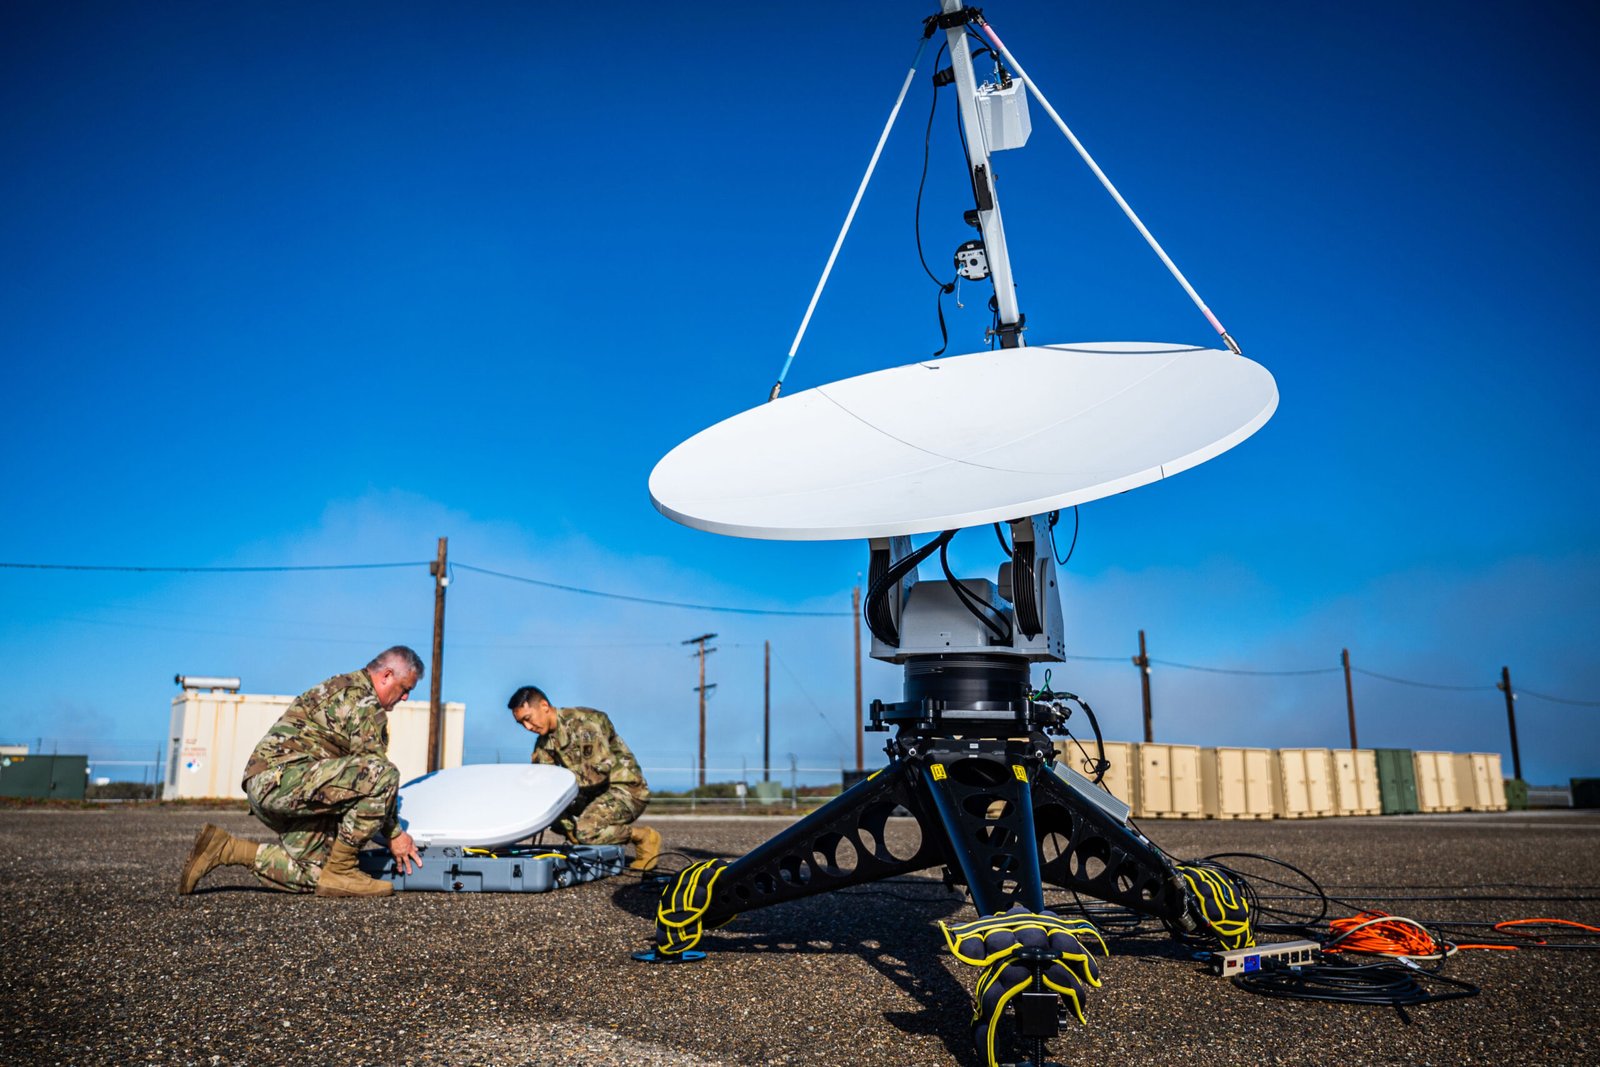 Two members of the 216th Space Control Squadron (SPCS) set up antennas as part of a ‘Honey Badger System’ during BLACK SKIES 22 at Vandenberg Space Force Base, Calif., Sept. 20, 2022. The 216 SPCS specializes in electromagnetic warfare and is participating in the Space Training and Readiness Command’s (STARCOM) BLACK SKIES 22, along with numerous other units spanning from California to Colorado. The first of its kind, BLACK SKIES 22 is a live simulation exercise designed to rehearse the command and control of multiple joint electronic warfare fires. (U.S. Space Force photo by Tech. Sgt. Luke Kitterman)